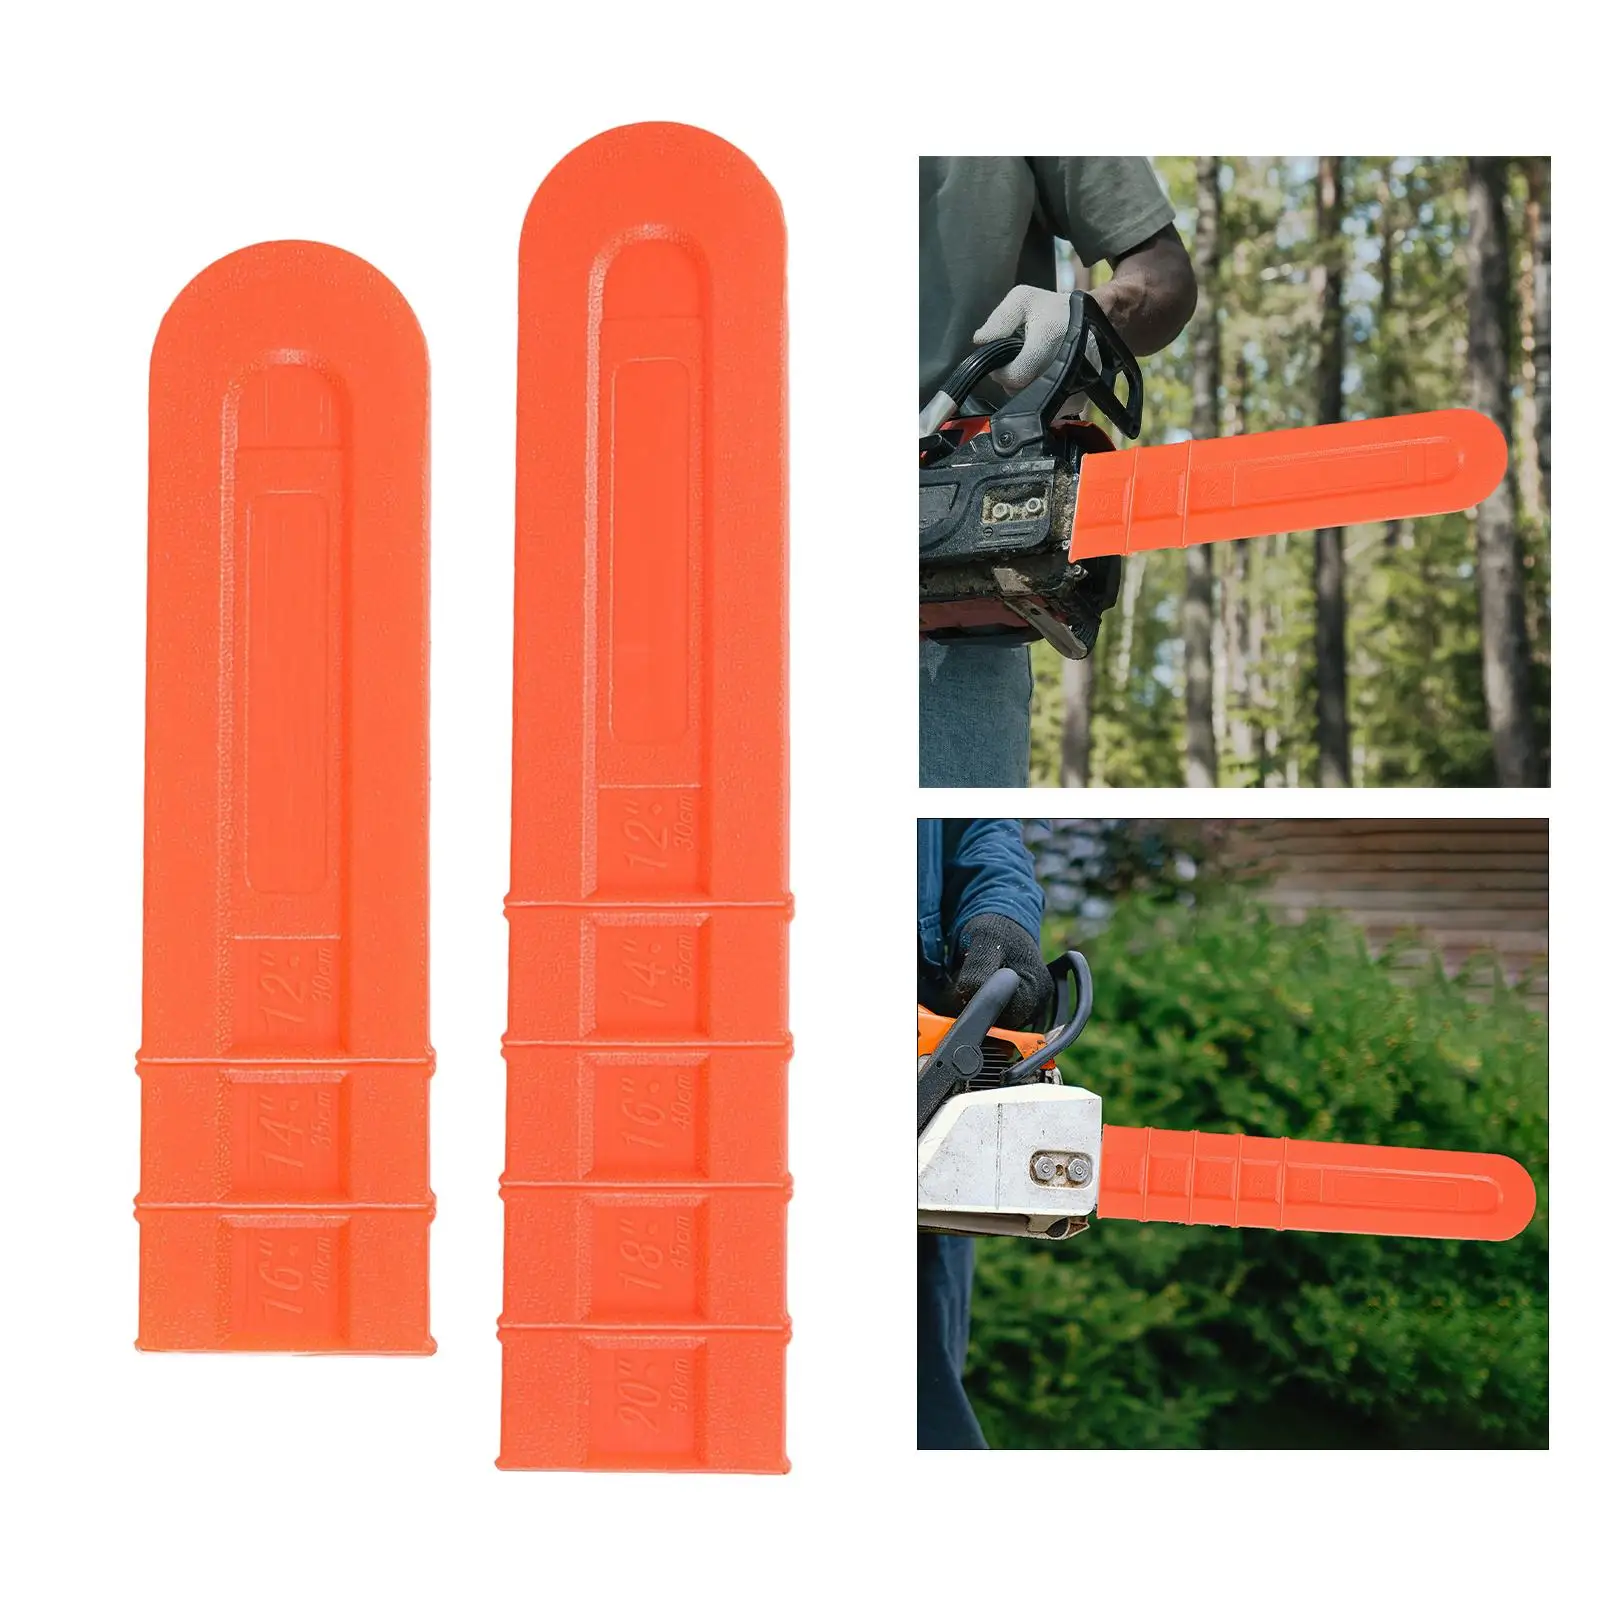 Durable Chainsaw Bar Protective Cover Scabbard Guard Garden Tools Accessories Chainsaw cover for Garden Replacement